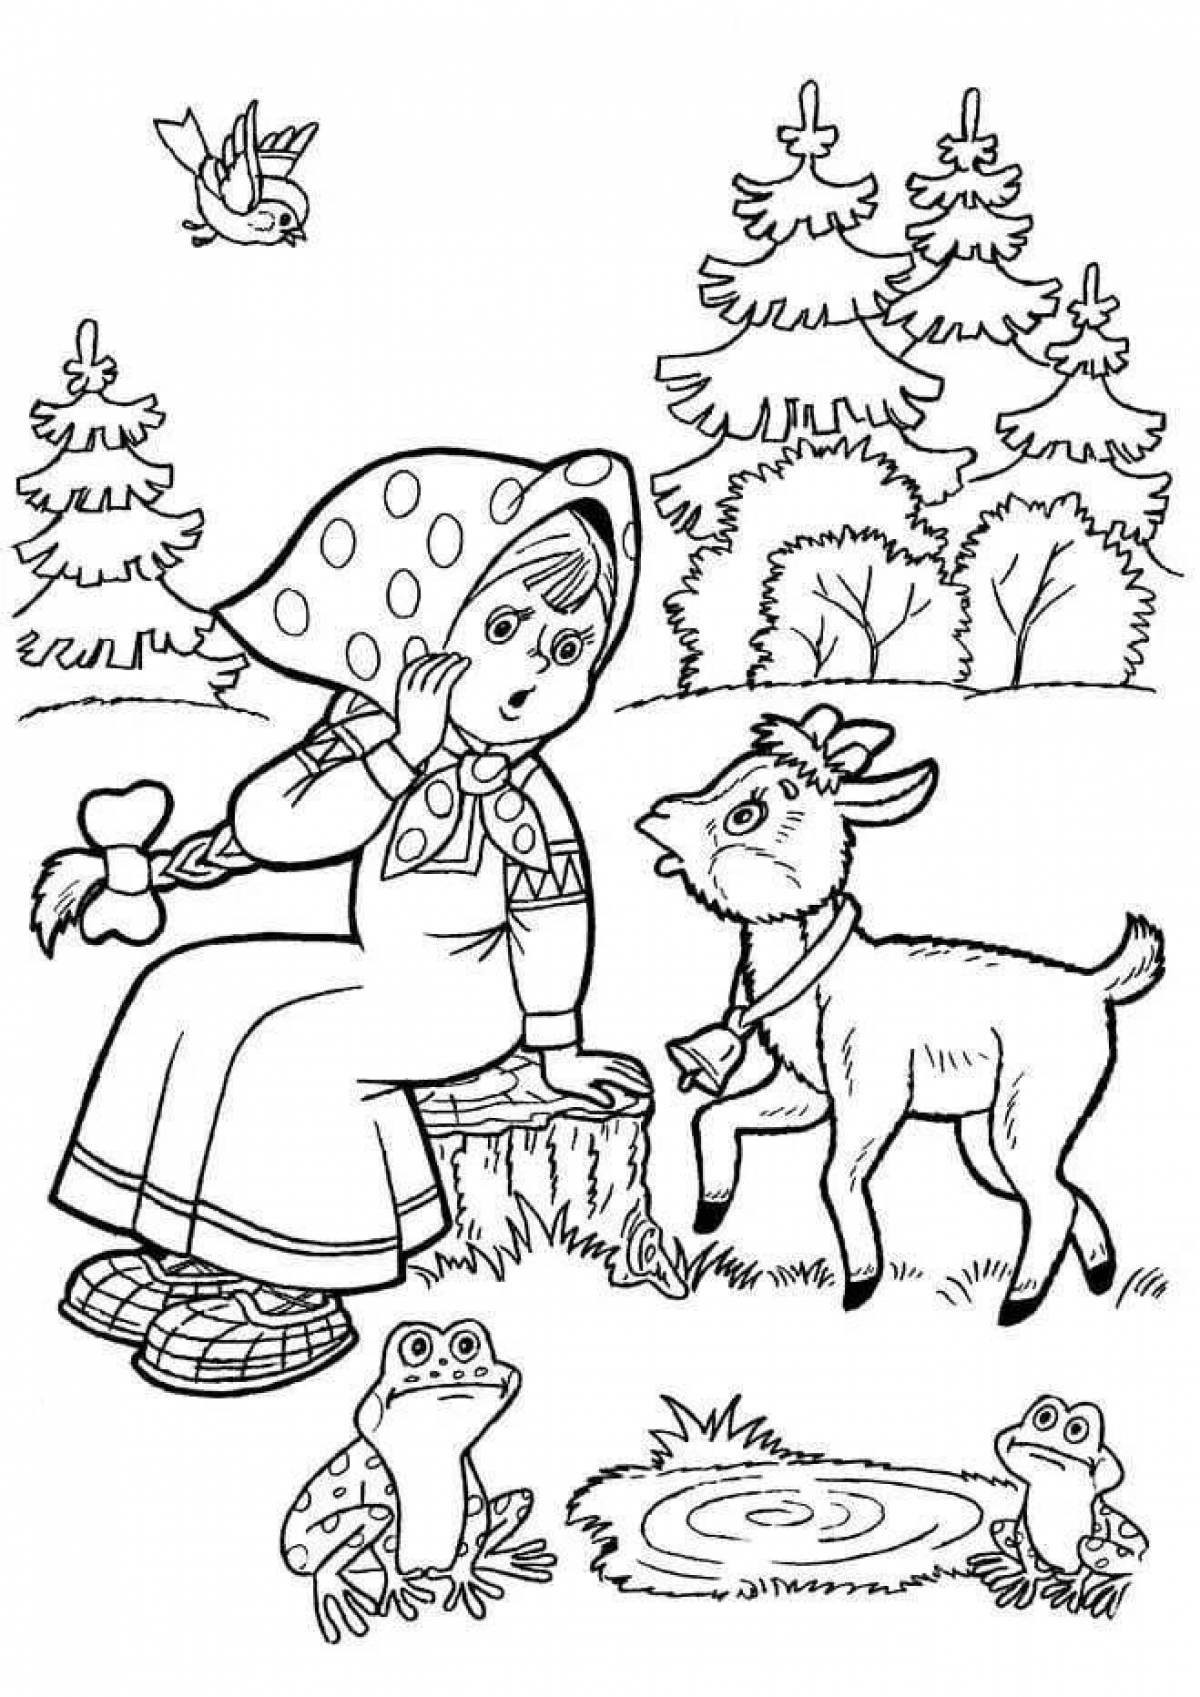 Majestic coloring pages heroes of Russian fairy tales